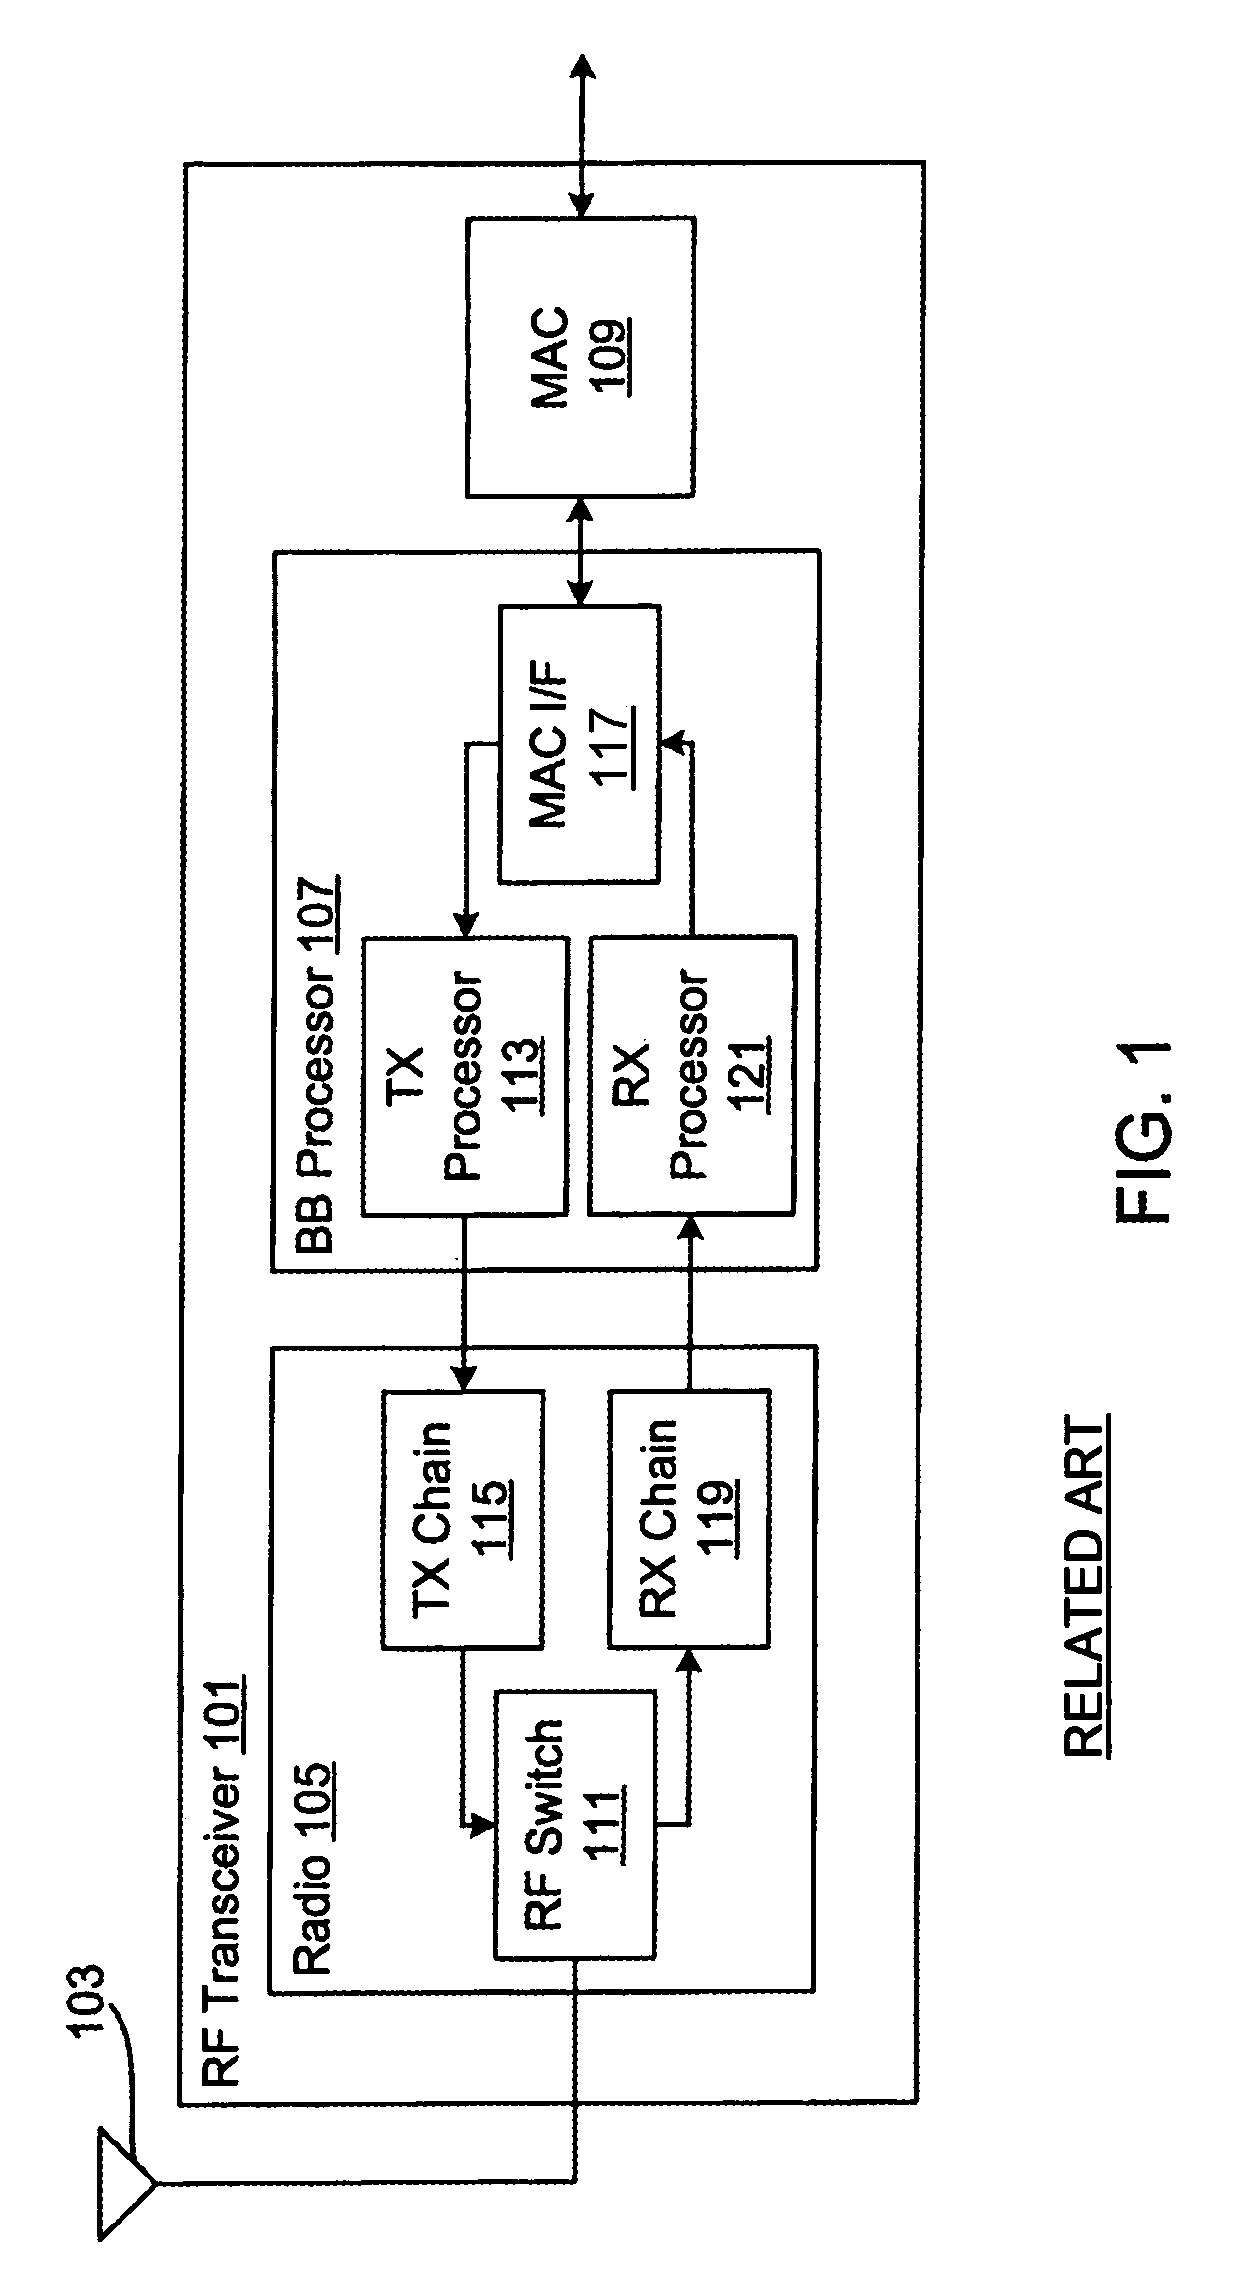 Transmit frequency domain equalizer